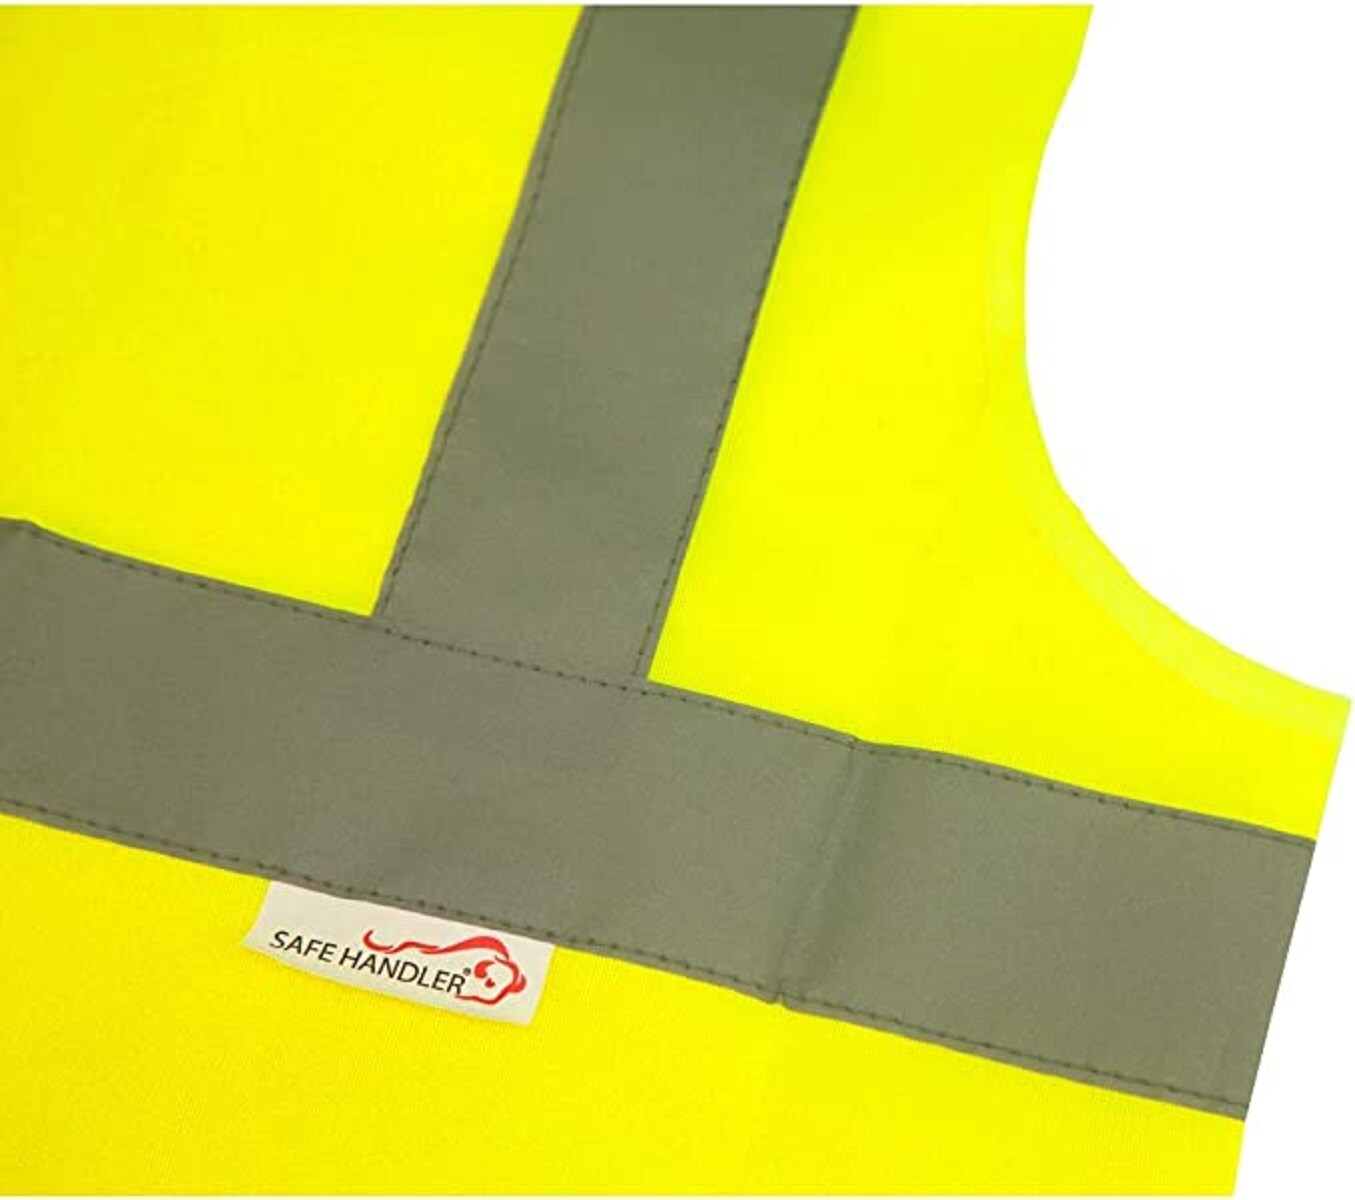  NRGready Safety Vest, Yellow Safety Vest for Men and Women, High  Visibility Safety Reflective Vest with 6 Pockets and Zipper, Meets  ANSI/ISEA Standards（yellow ） : Tools & Home Improvement